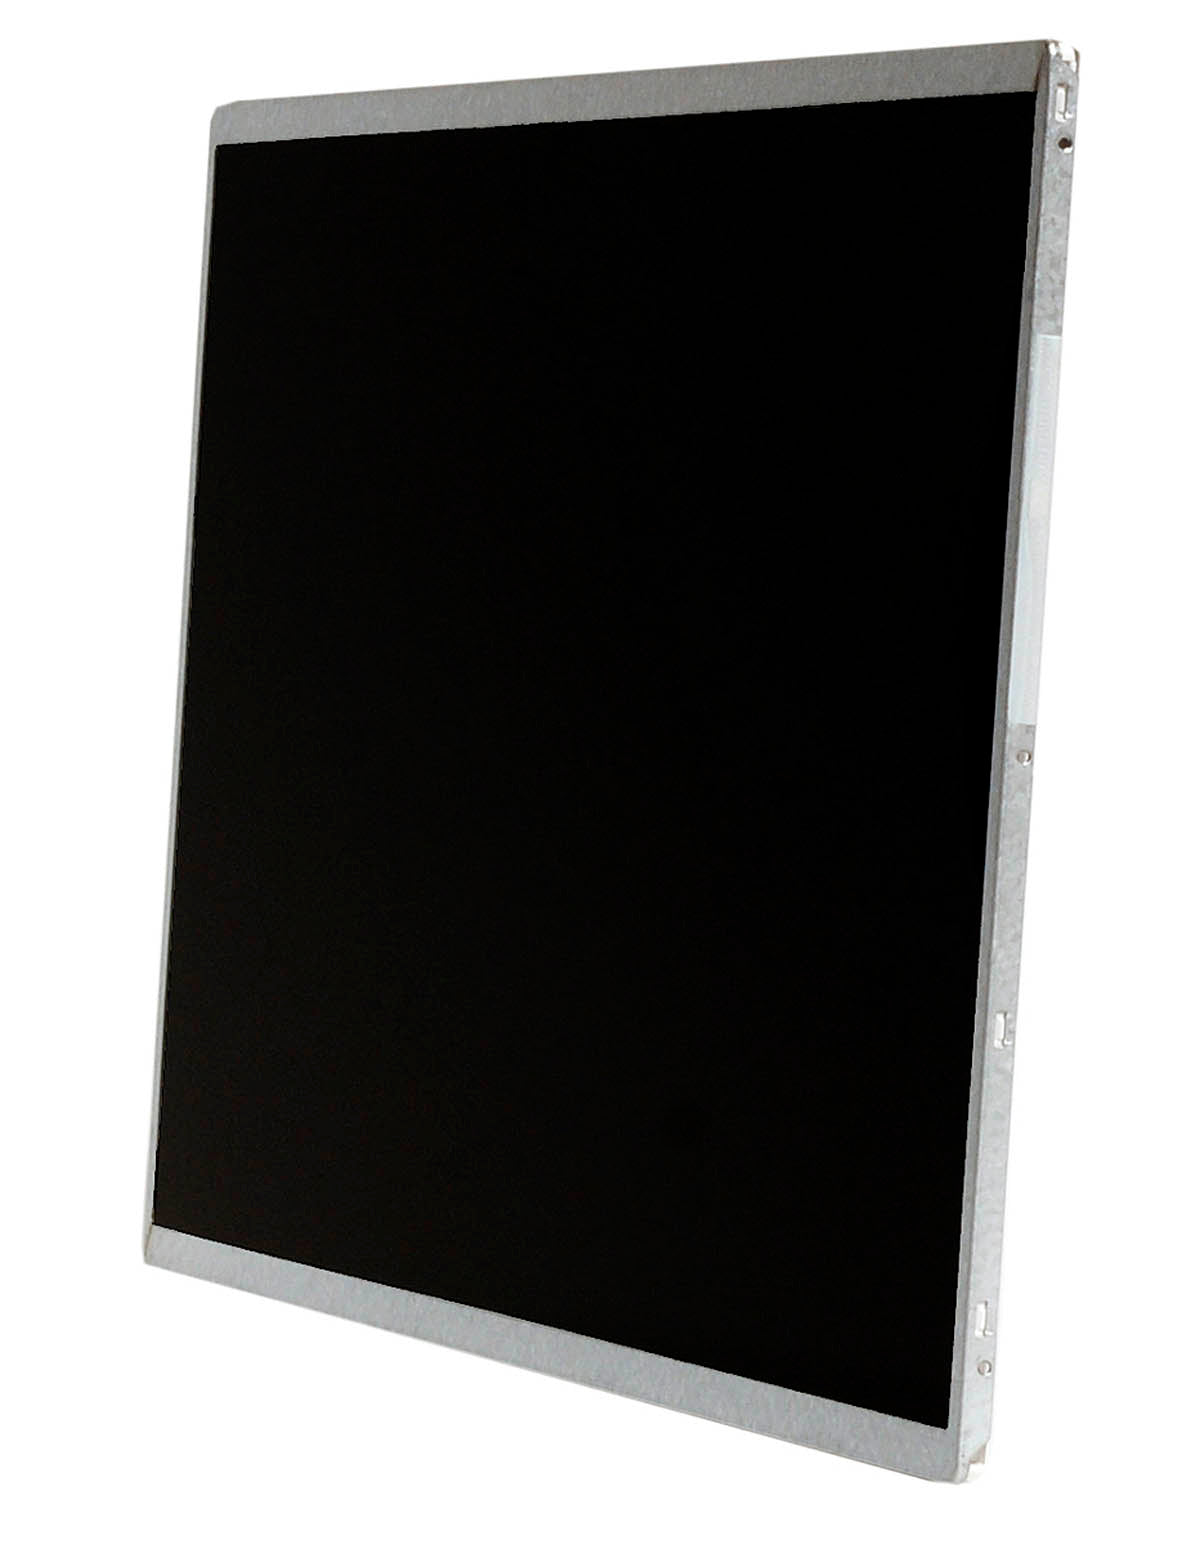 Replacement Screen For LTN140AT16-401 HD 1366x768 Glossy LCD LED Display